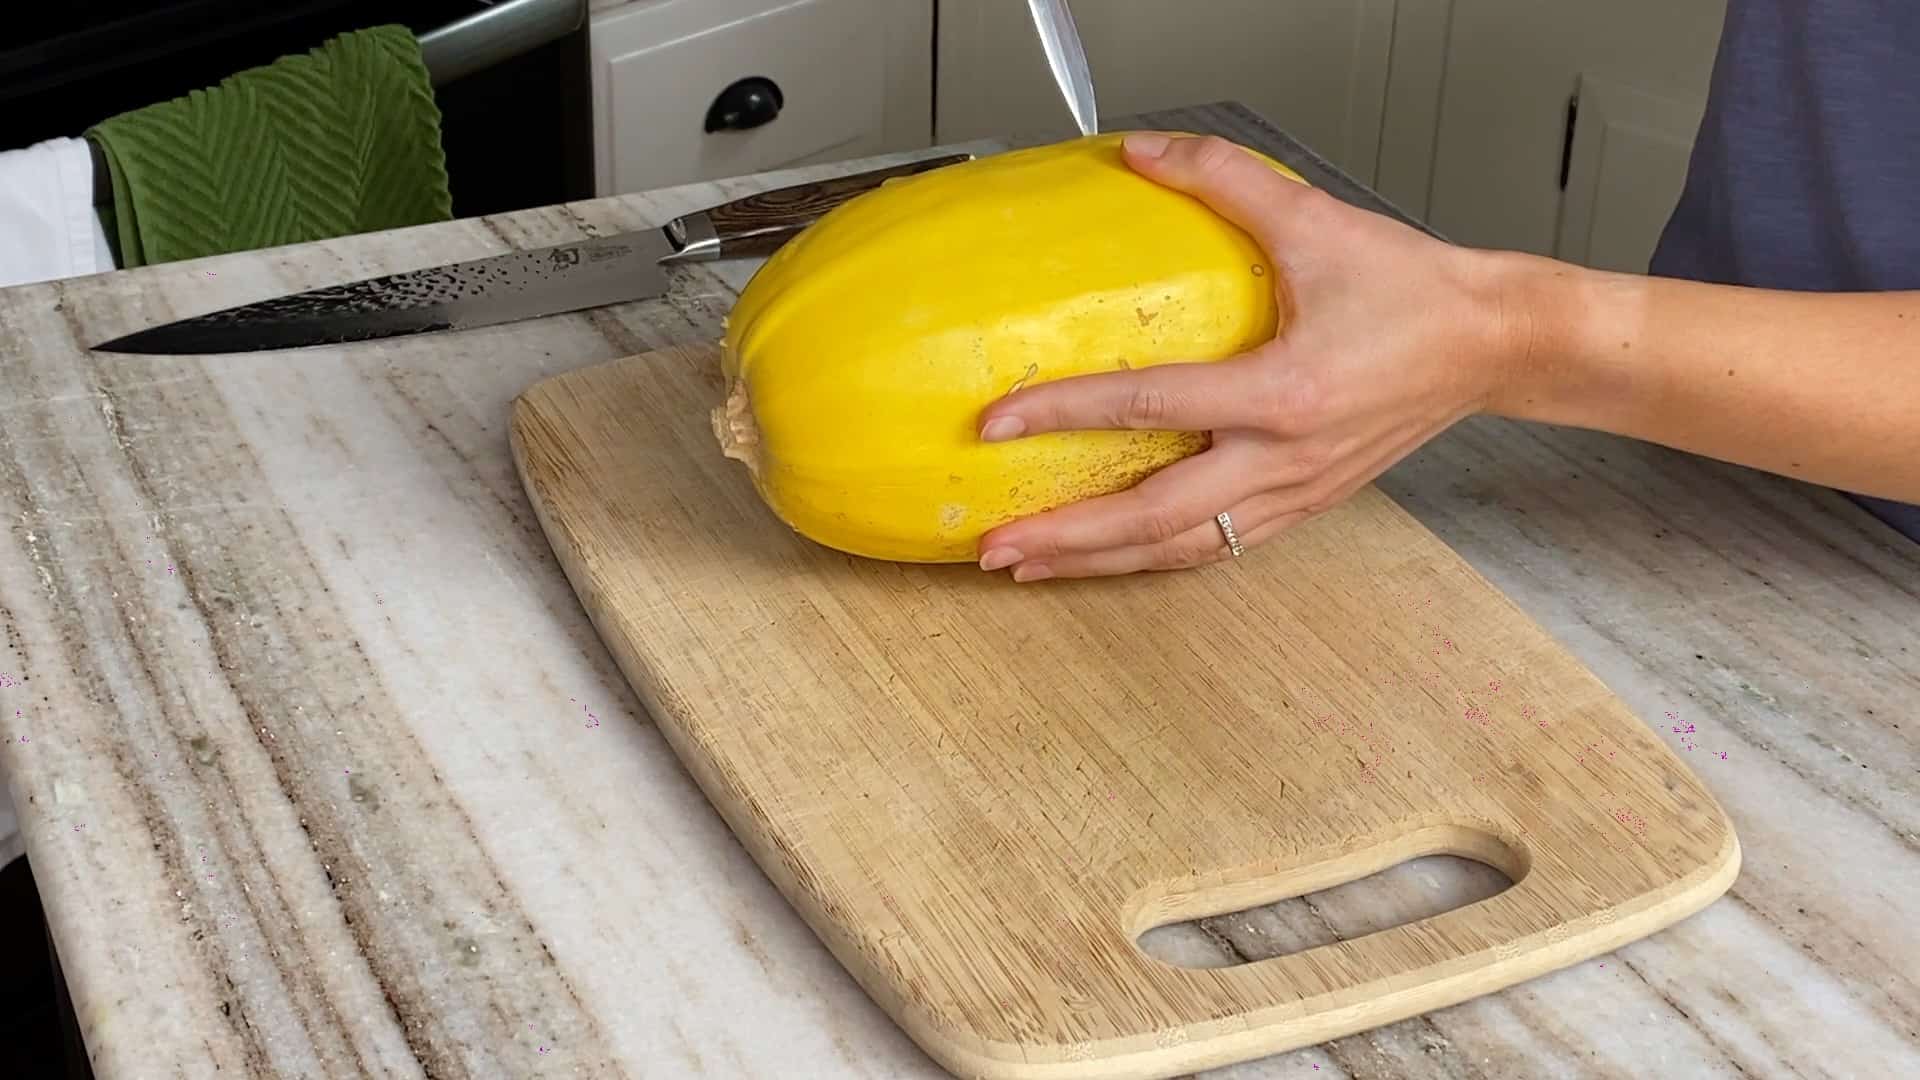 woman holding a spaghetti squash and making slits with a knife